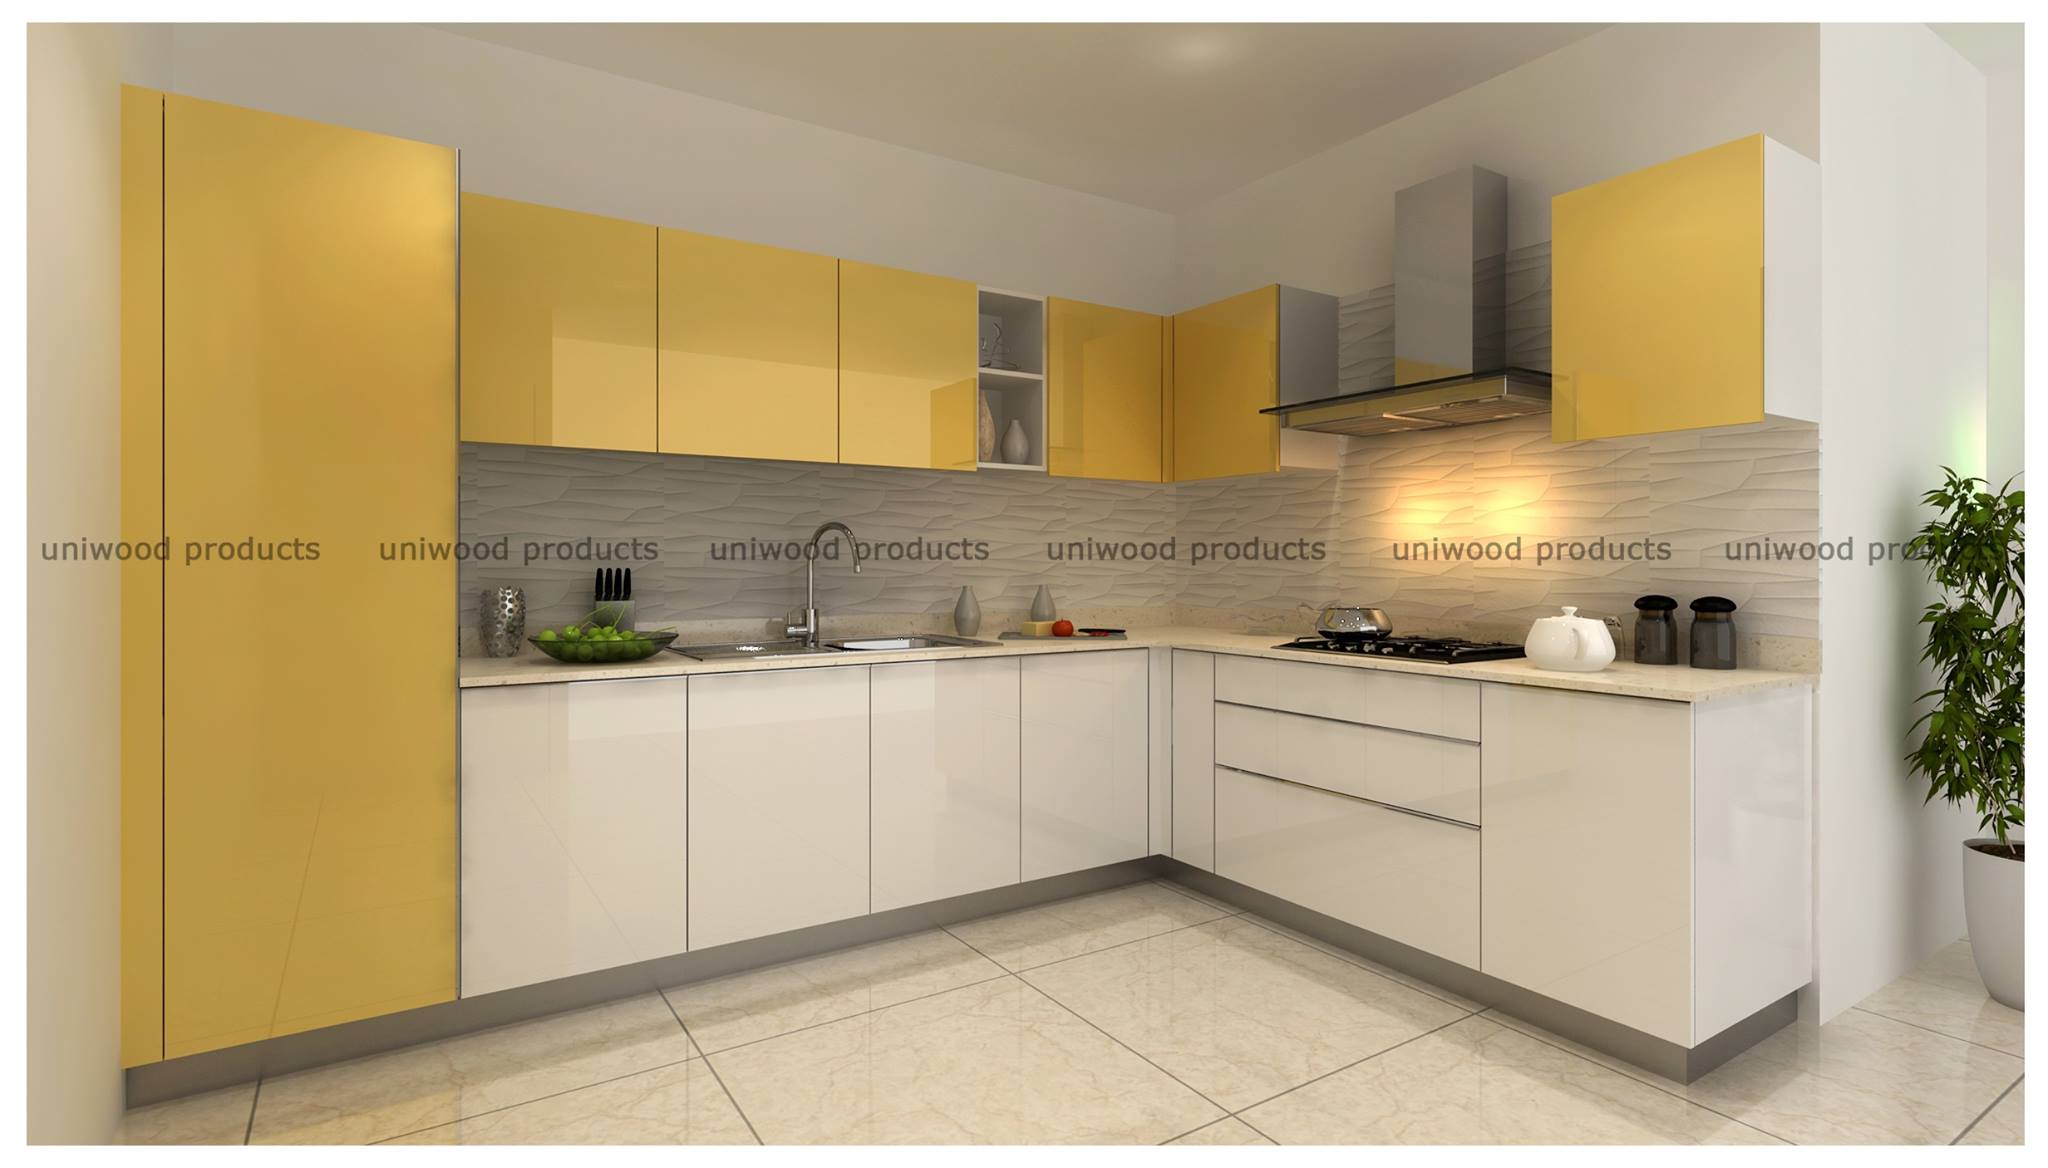 Modular Kitchen With Yellow and Cream Cabinets